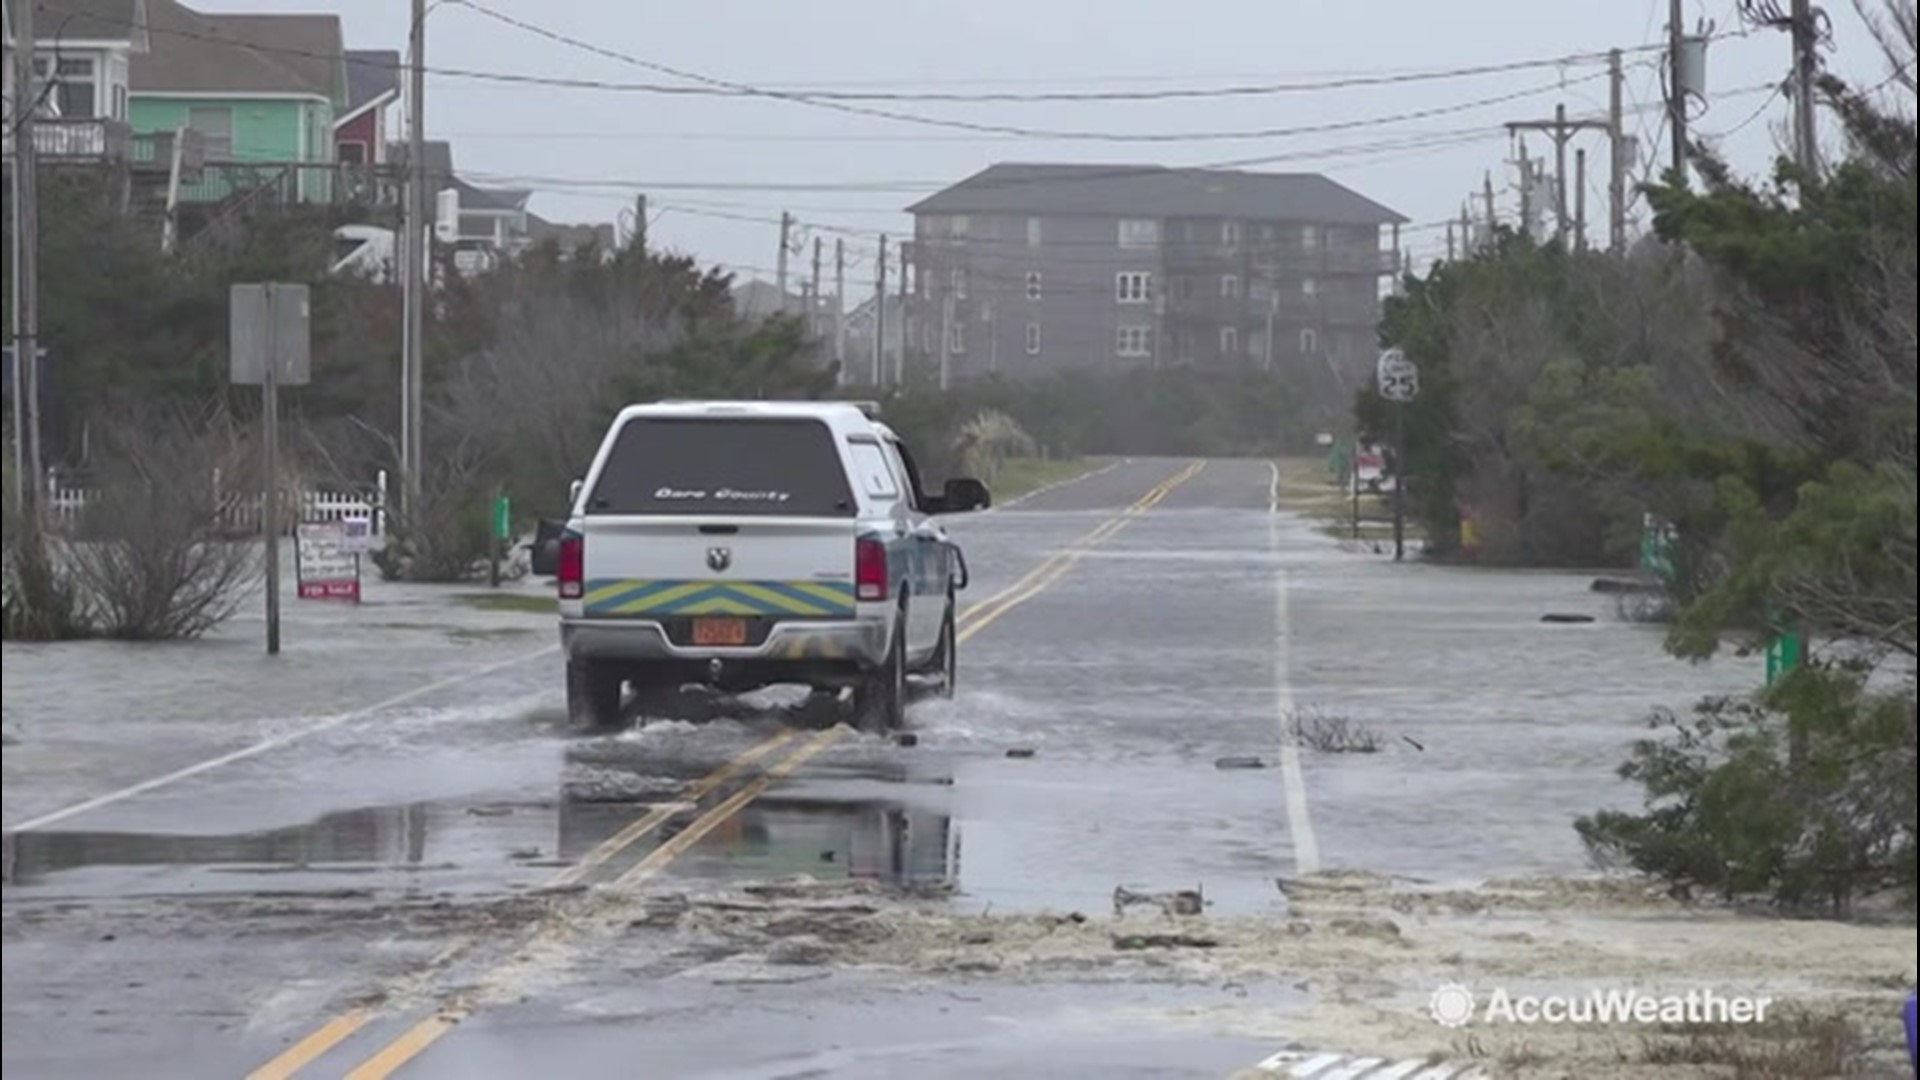 Strong winds, heavy rain and coastal flooding all happening as an unnamed coastal storm strengthens into Sunday near the Outer Banks of North Carolina. Dunes have been overtopped and neighborhoods have flooded. Highway 12 closing at 5 p.m. Saturday as conditions worsen.